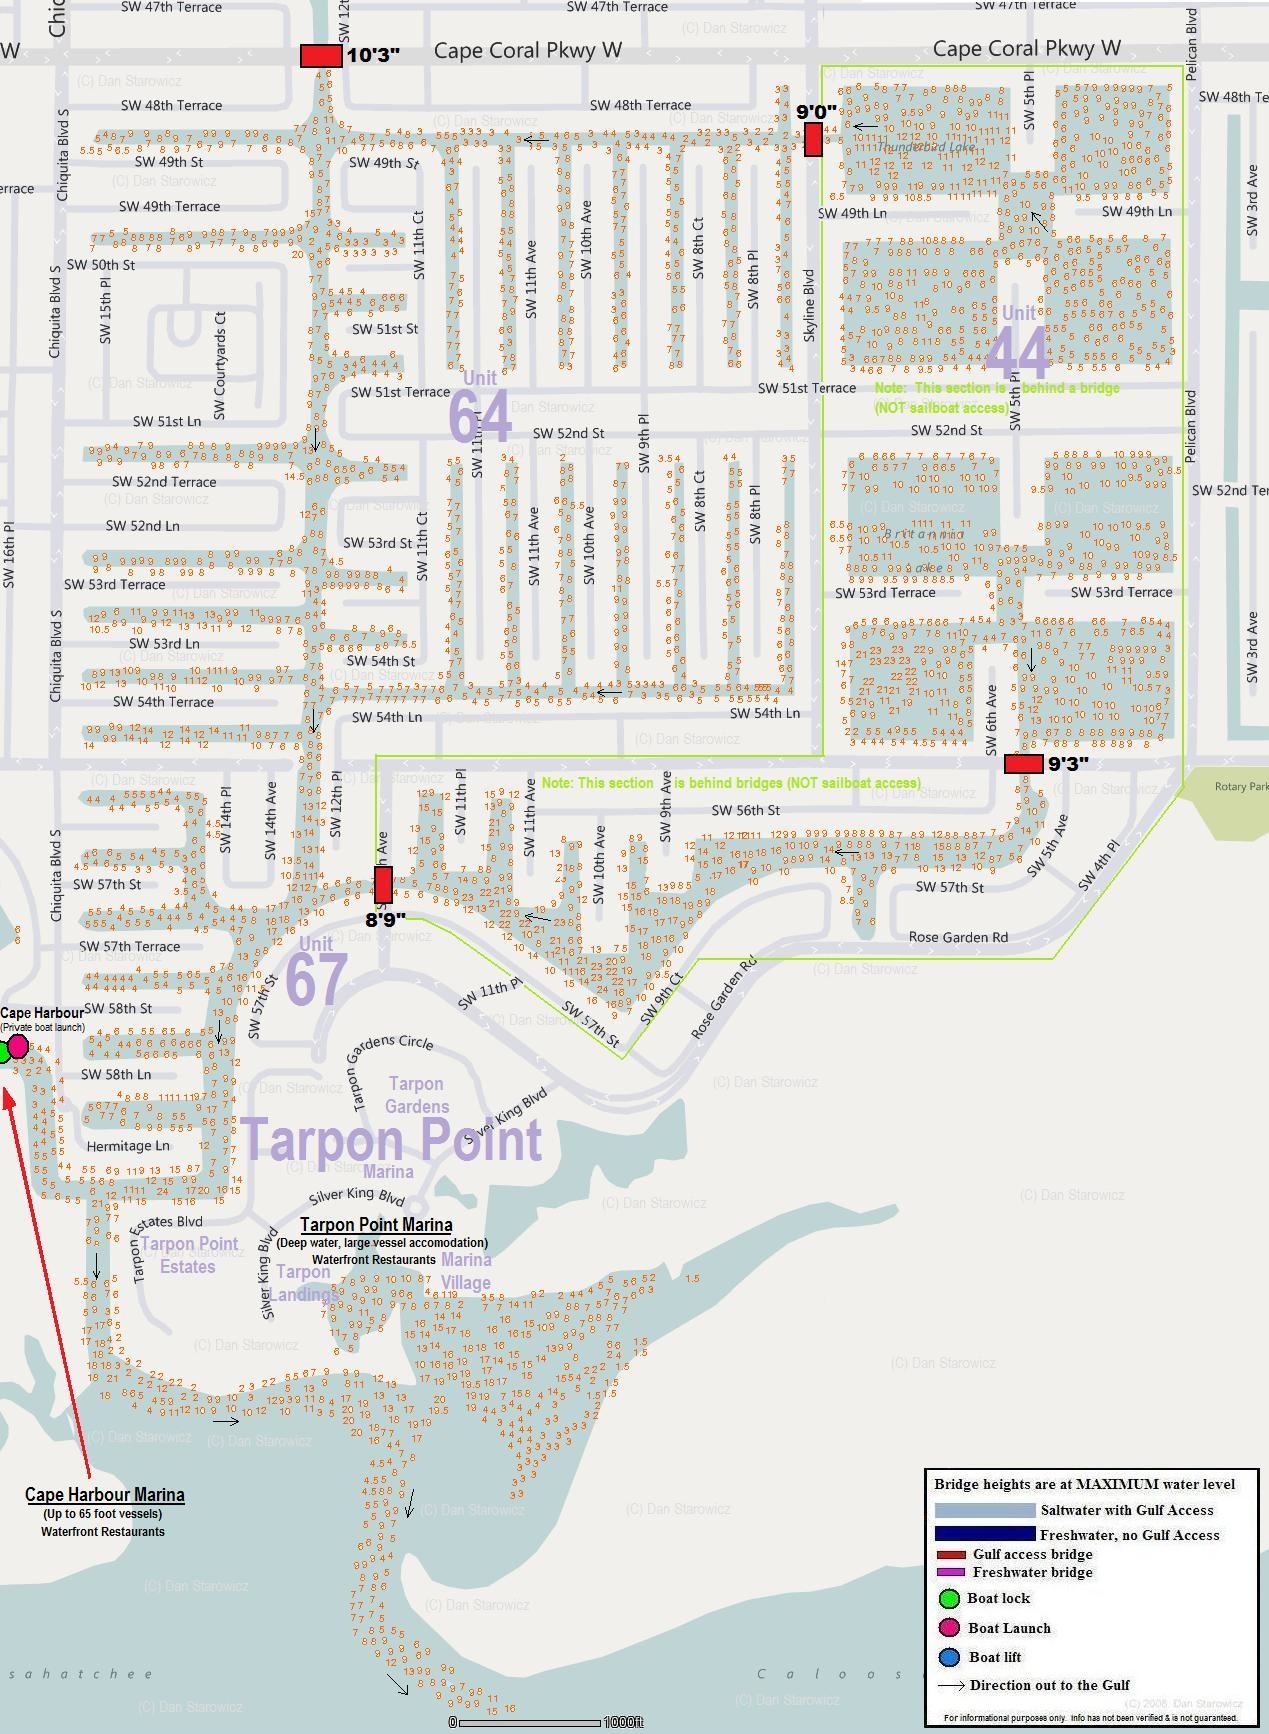 Cape Coral Unit 64 and 67 canal depths